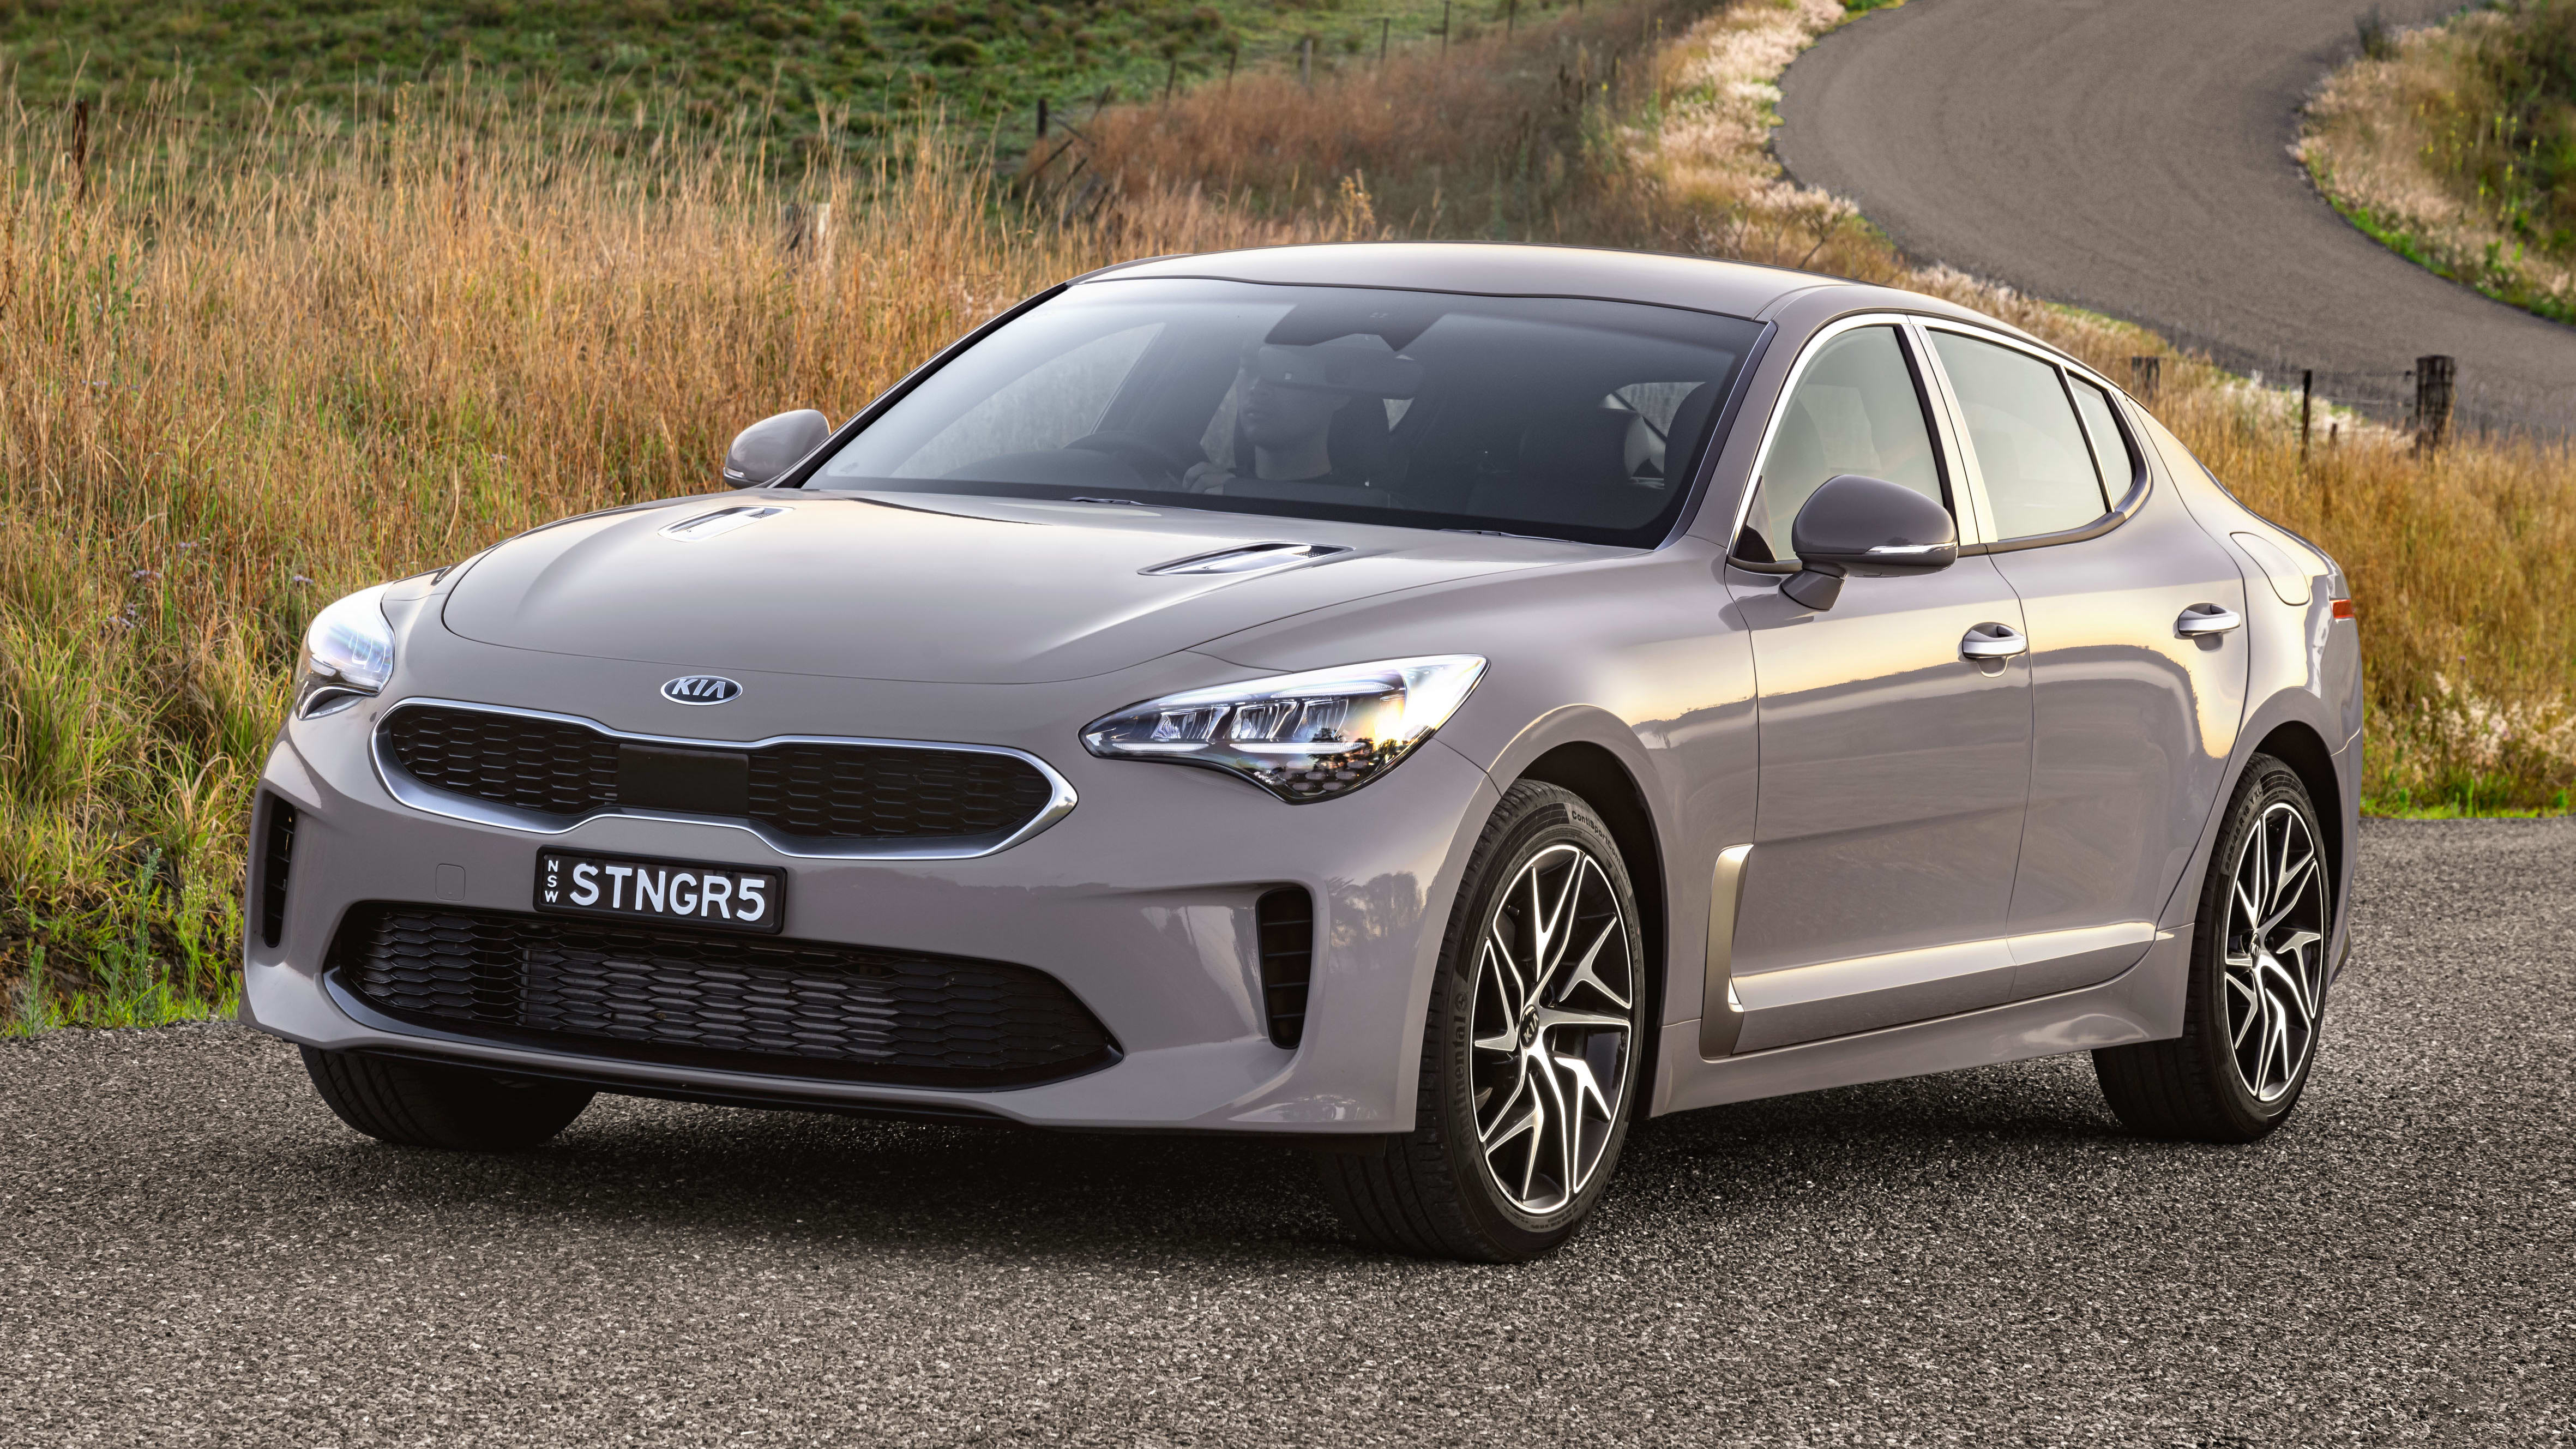 2021 Kia Stinger Price And Specs Price Rises And Spec Changes For Facelifted Model Caradvice